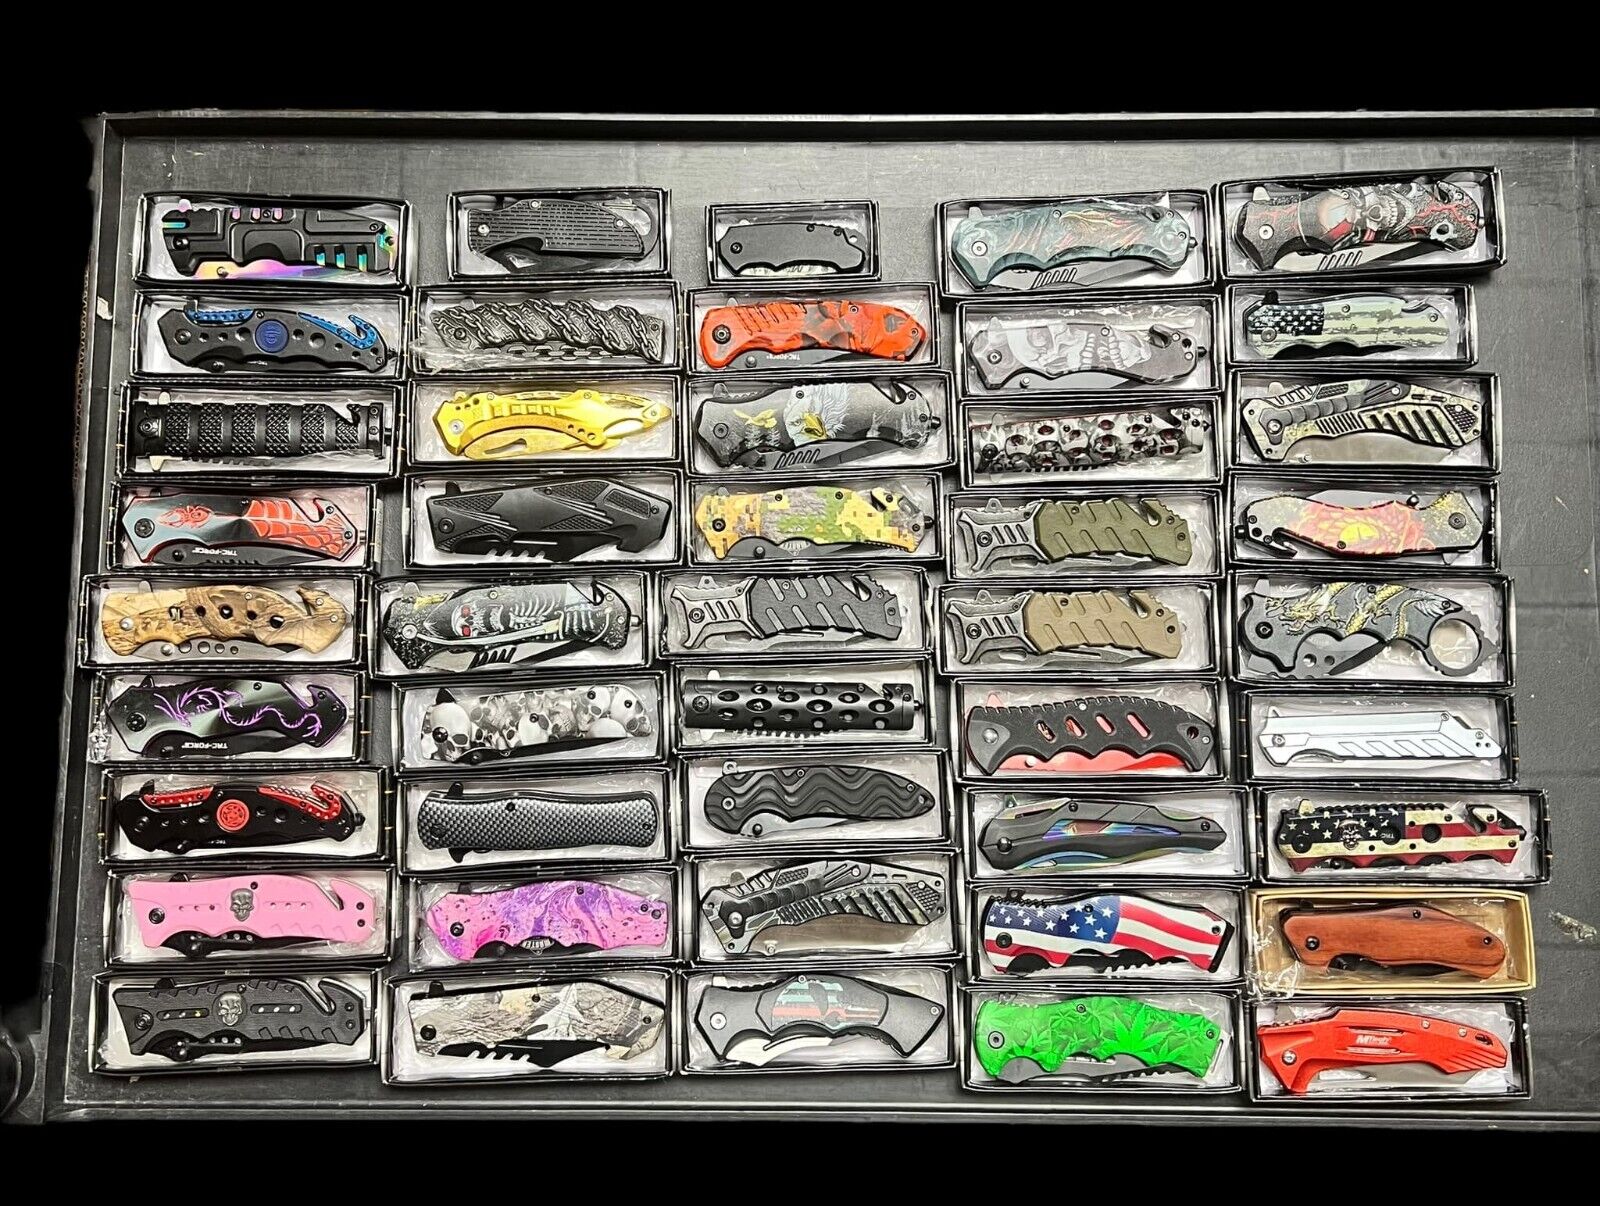 LOT OF 45 Spring Assisted pocket knife Collectible Design Wholesale Knives AS-IS Без бренда